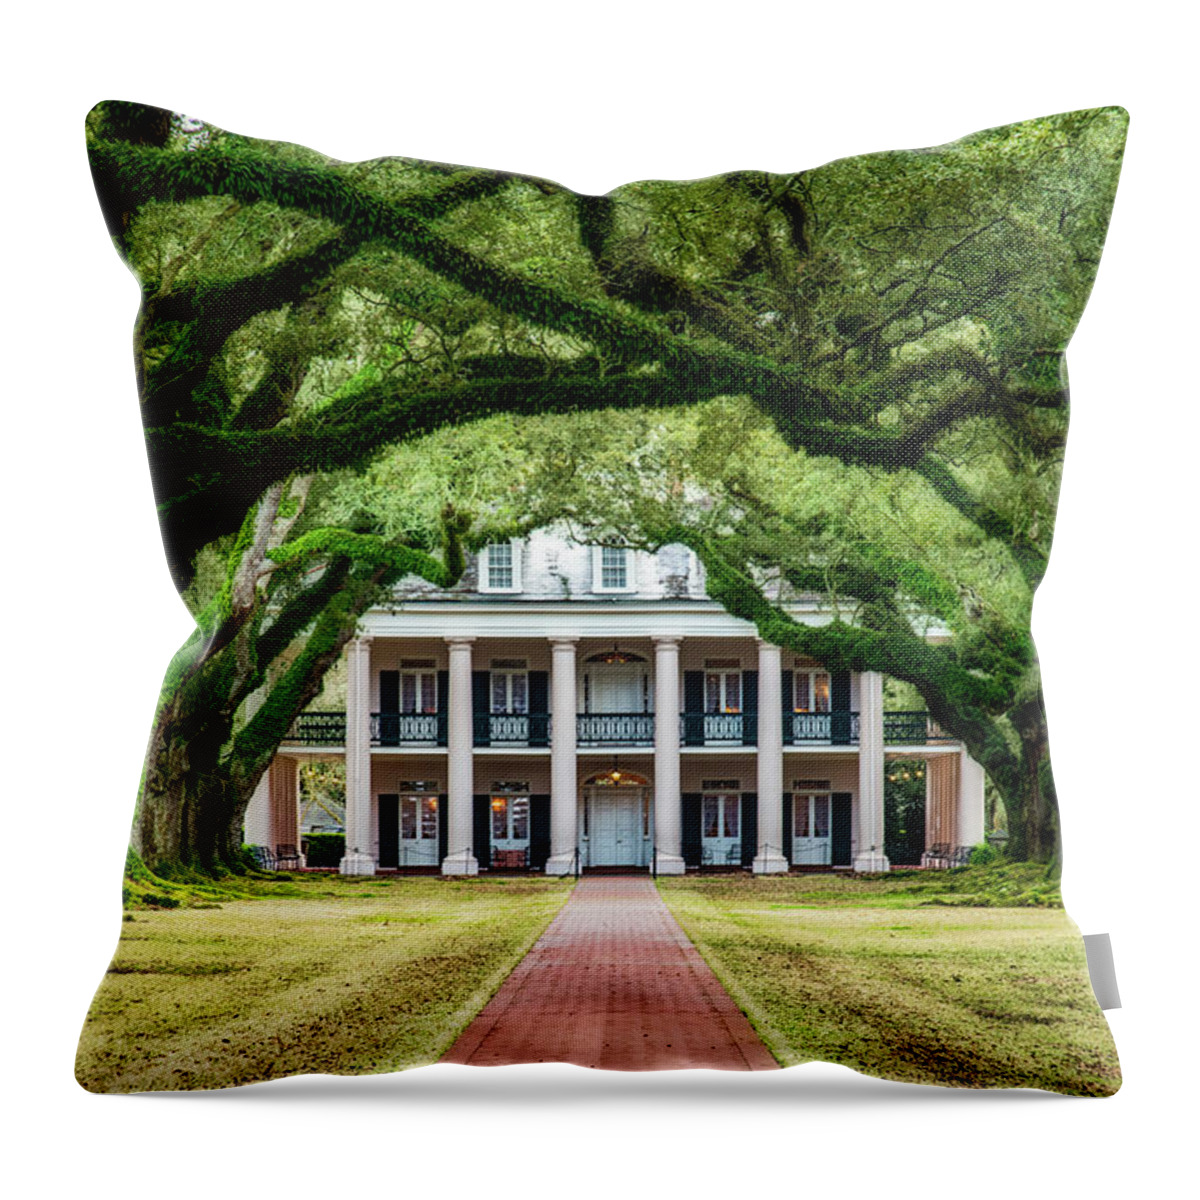 Louisiana Throw Pillow featuring the photograph Oak Alley Plantation by Andy Crawford